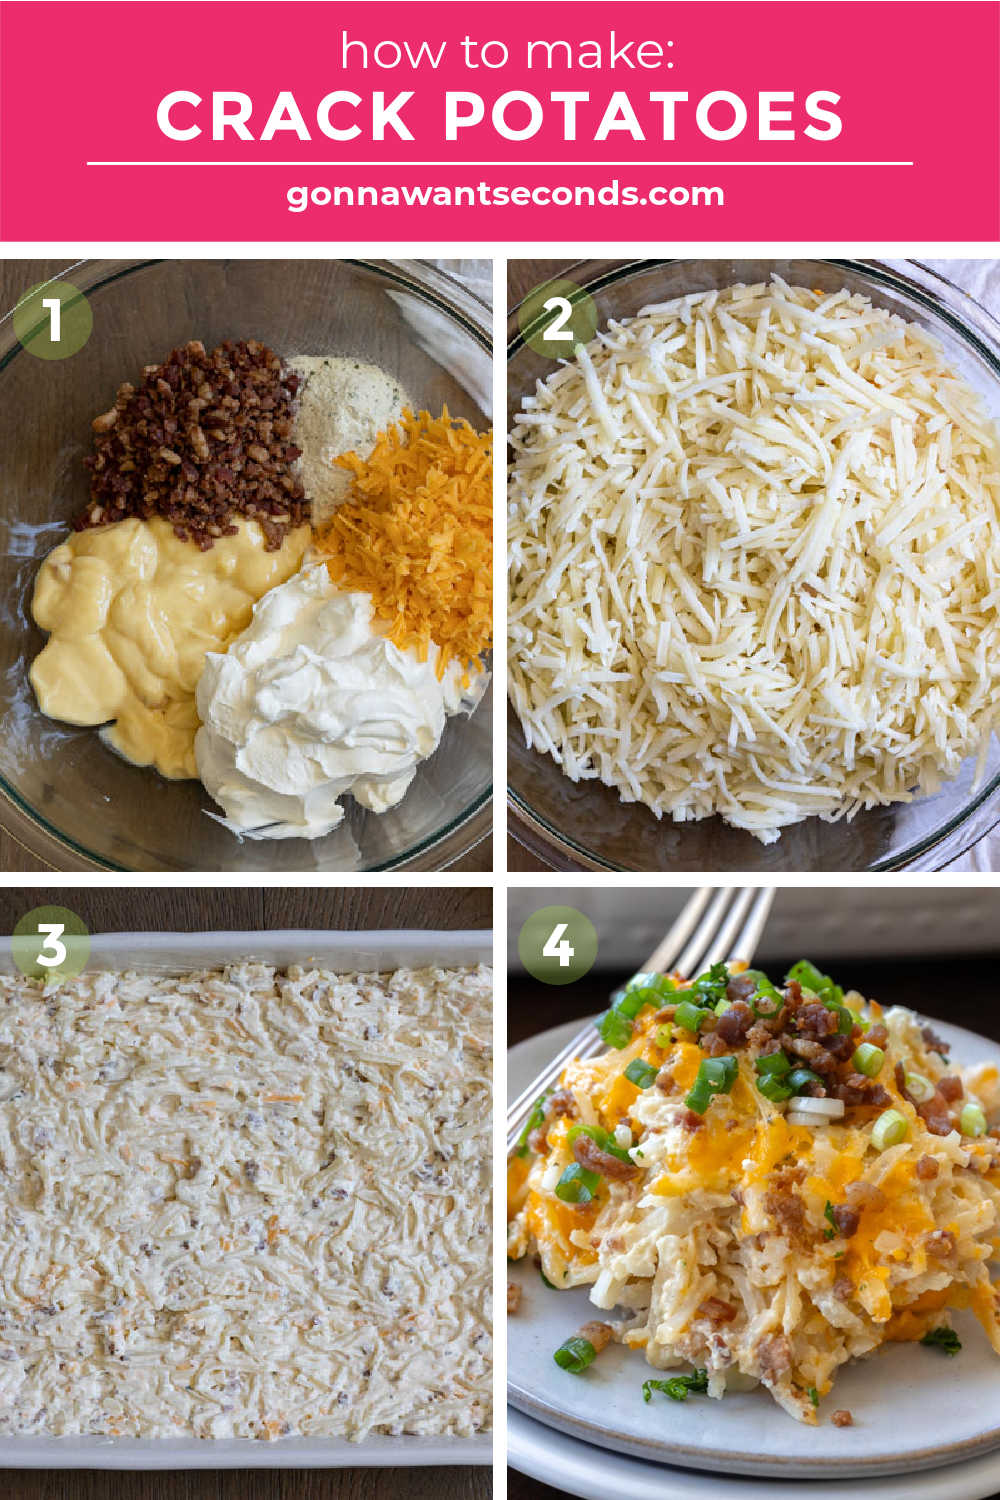 Step by step How to make crack potatoes